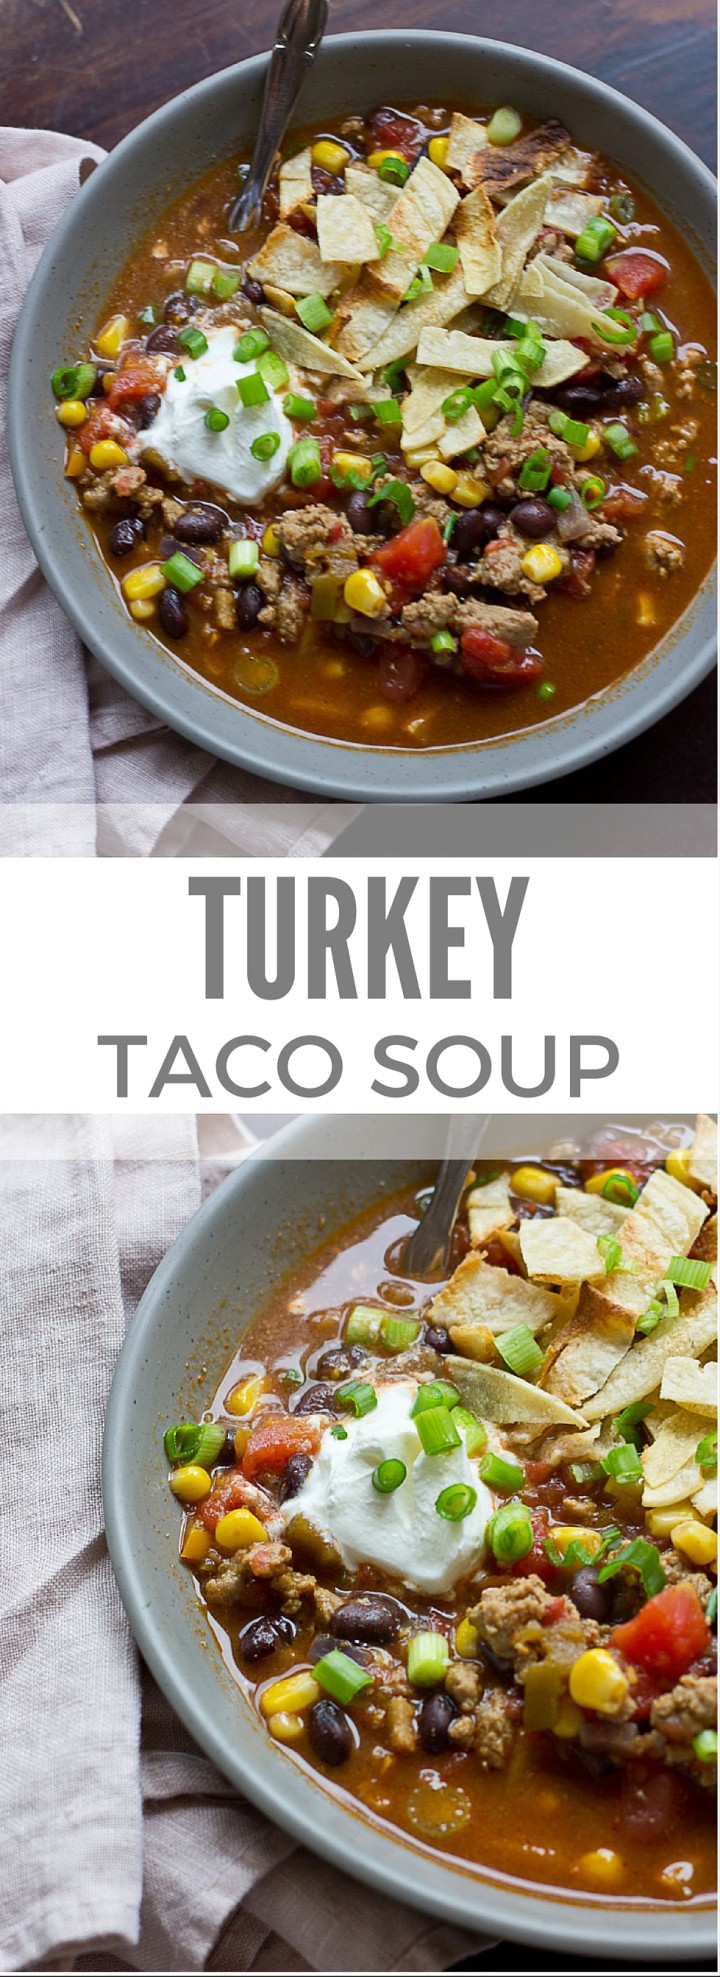 This Turkey Taco Soup is easy peasy to make for a weeknight dinner... a healthy meal the whole family will enjoy. Toss all ingredients into a pot and simmer until you're ready to eat! The toppings are the best part!!